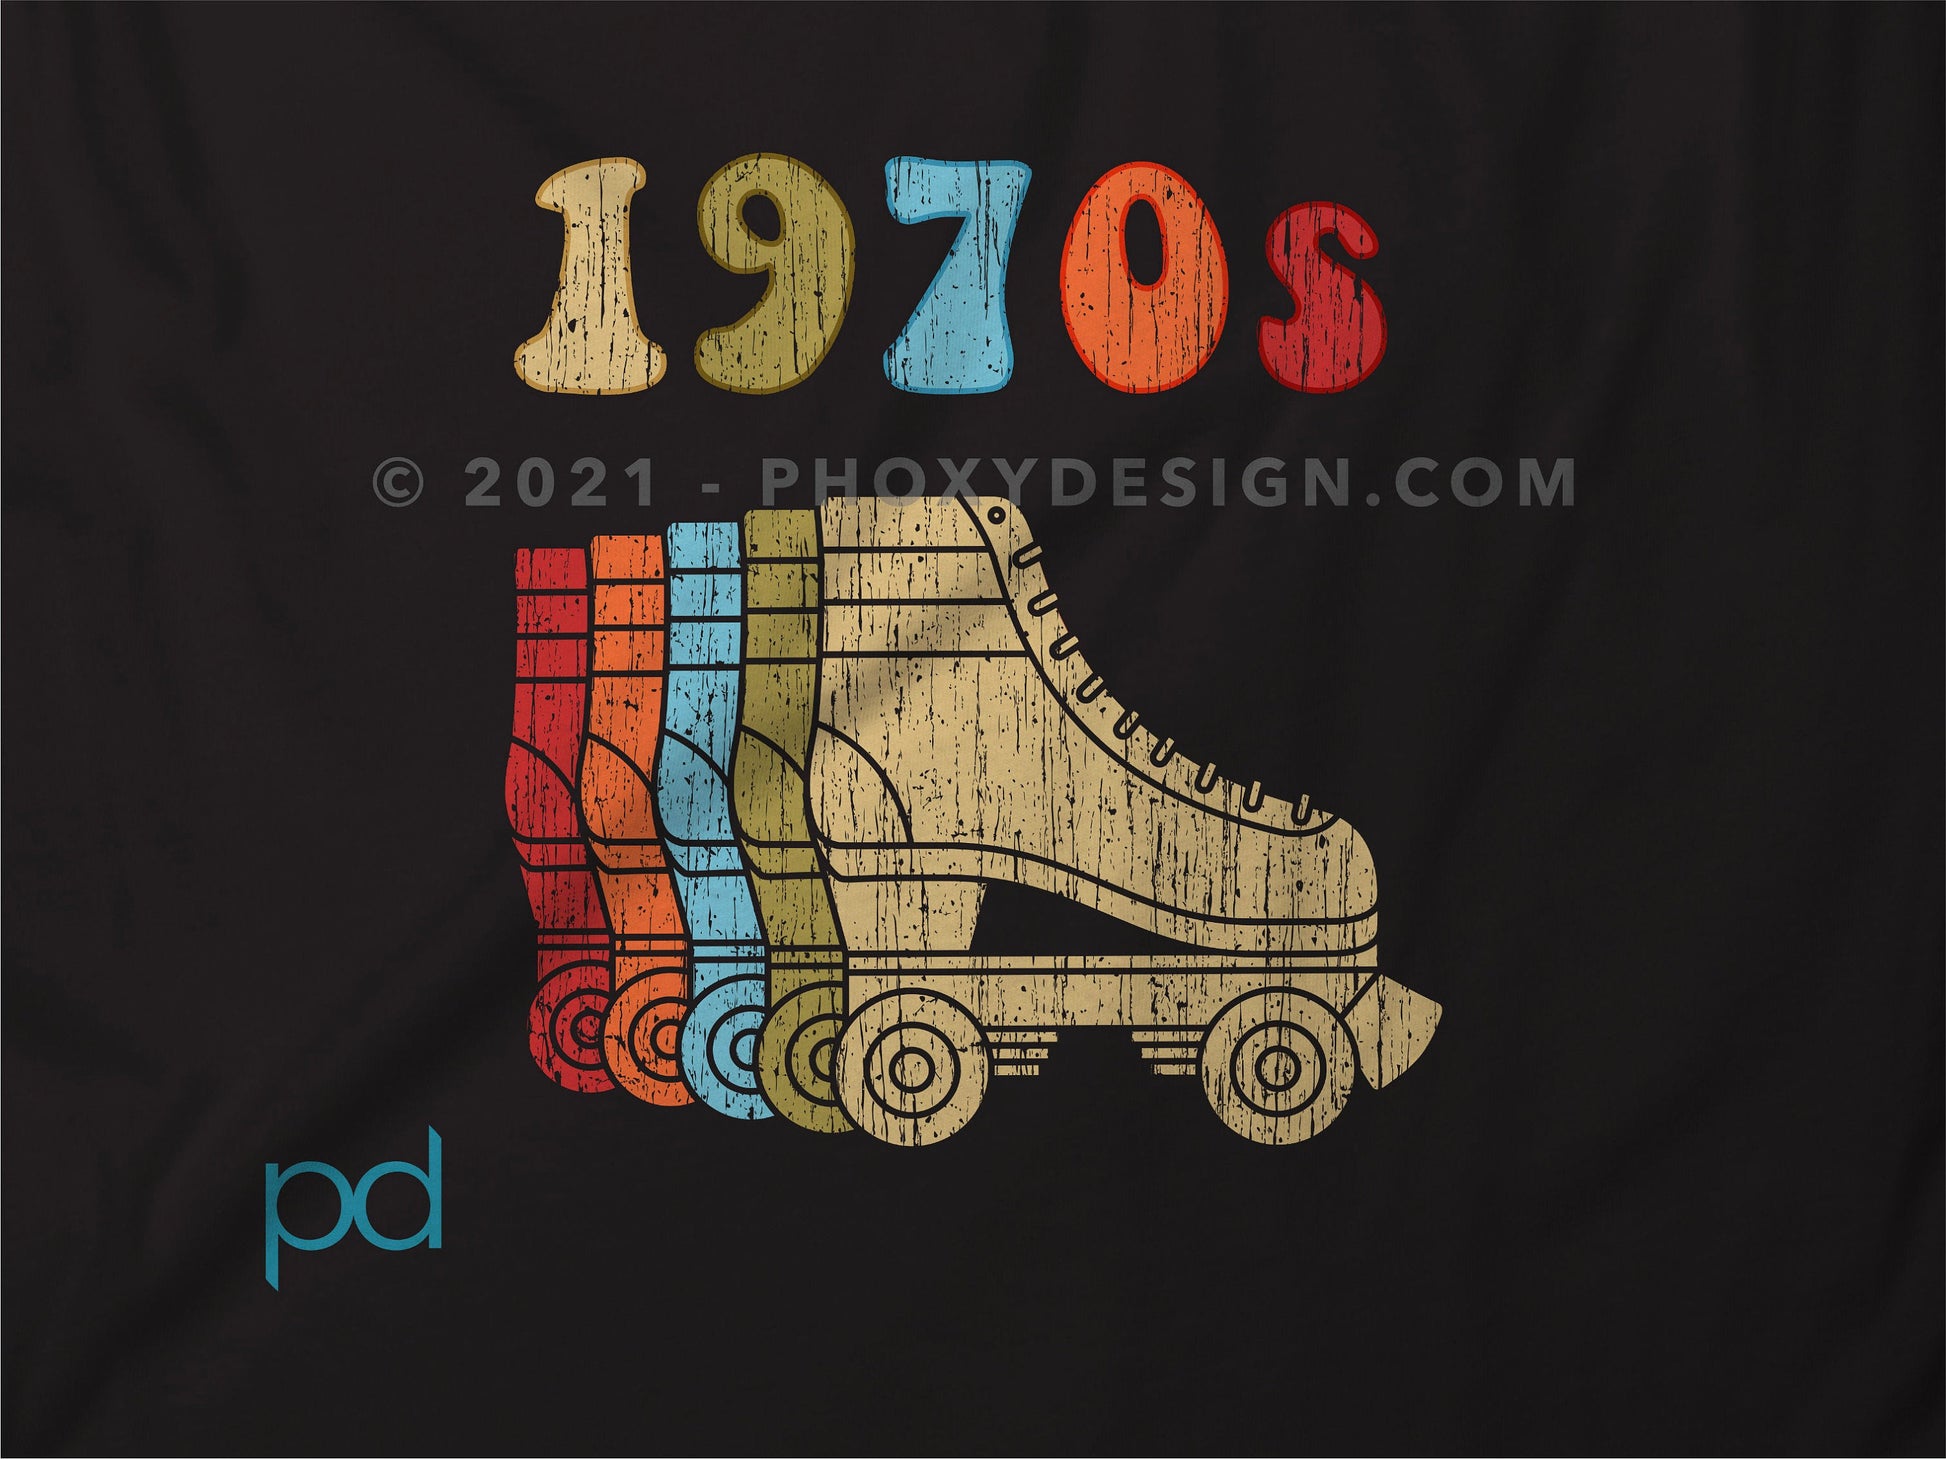 1970s Roller Skates T-Shirt, Repeating 70s Disco Derby Retro Vintage Worn Classic T Shirt Tee Top